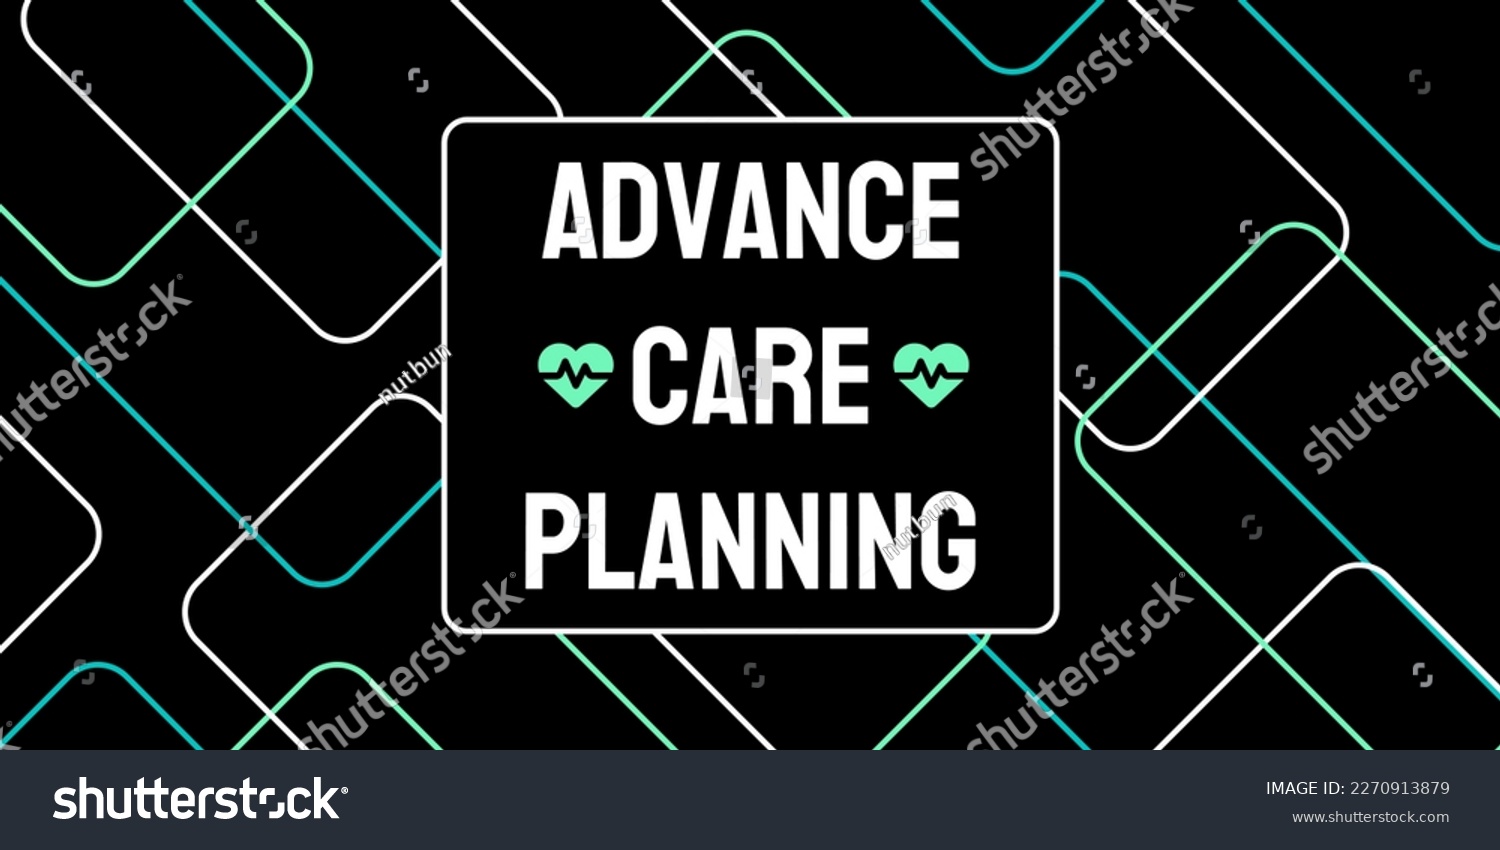 SVG of Advance Care Planning: Advance Care Planning is the process of discussing and documenting healthcare preferences for future medical decisions. svg